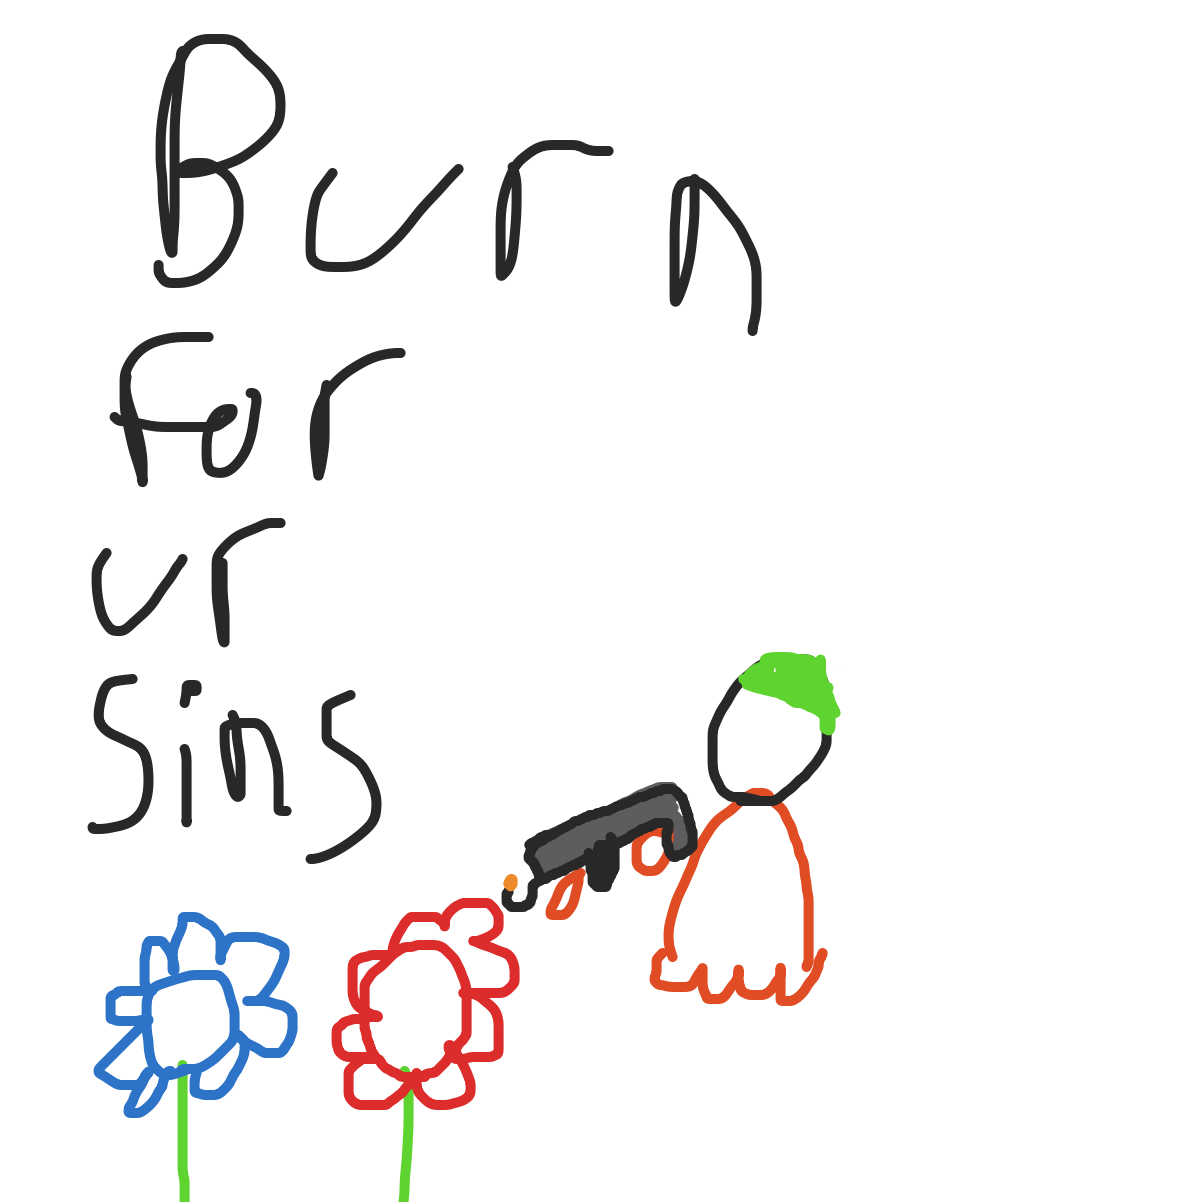 Burn for your sins - Online Drawing Game Comic Strip Panel by Steven117